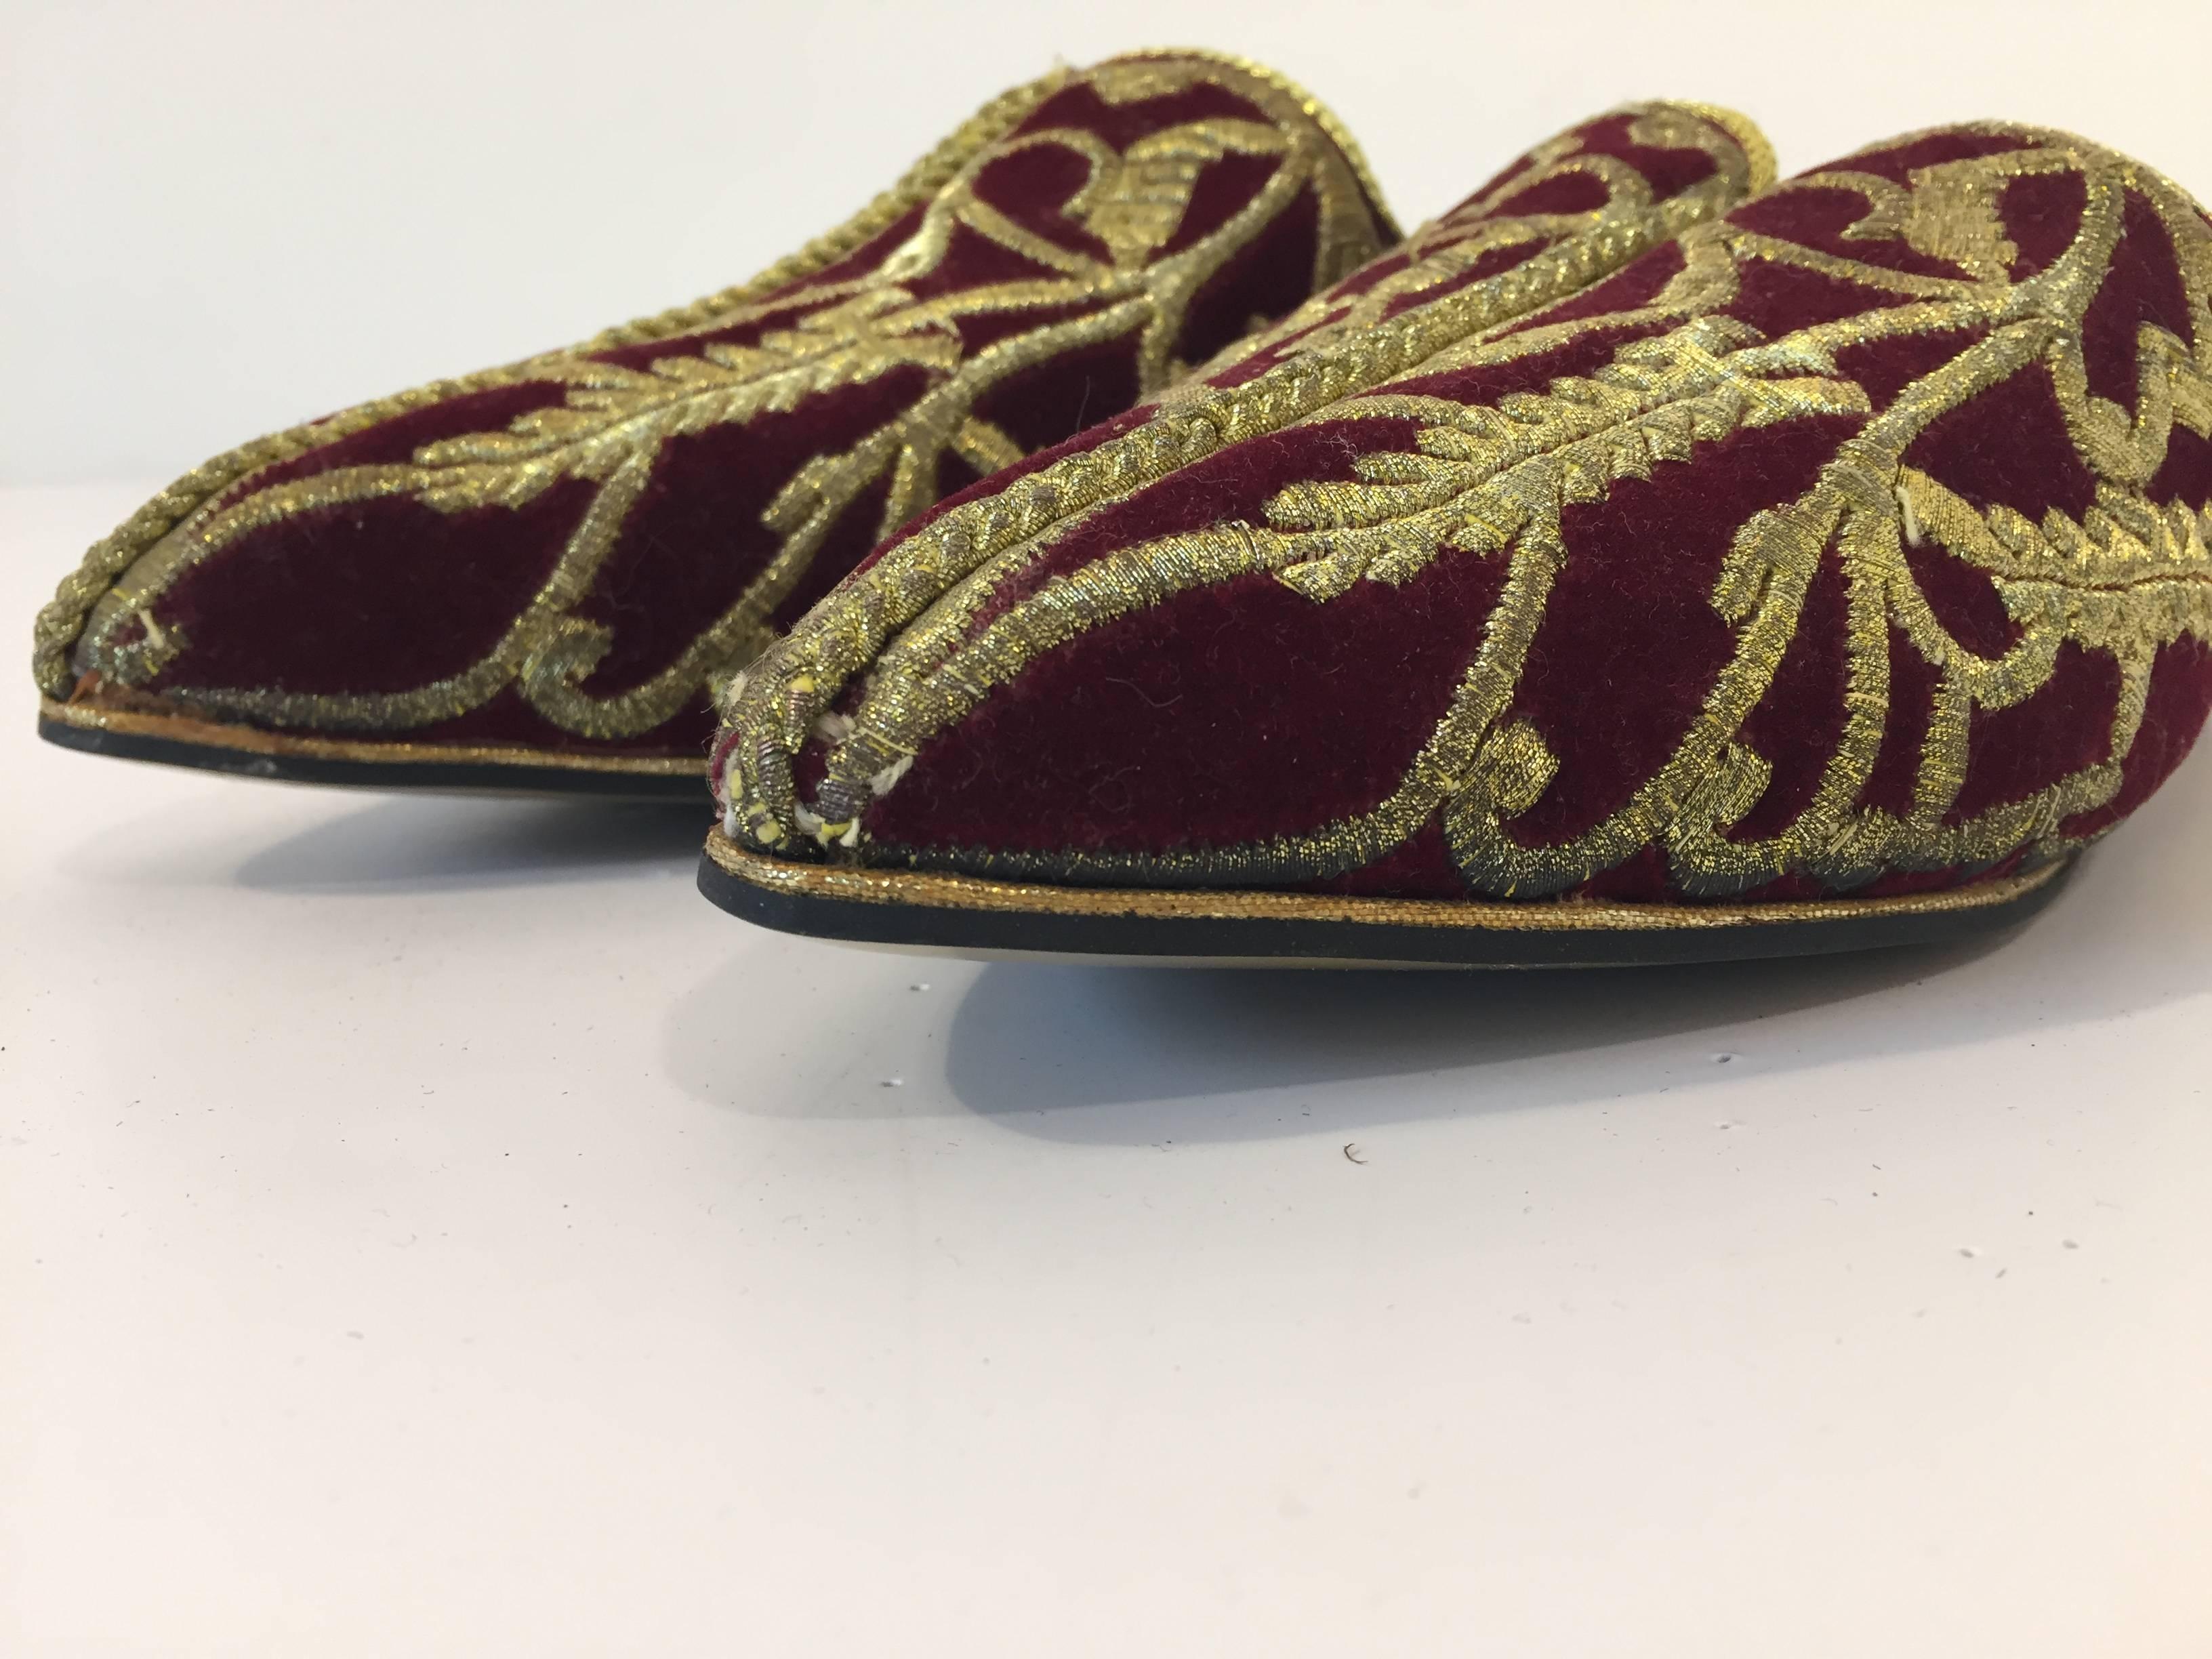 Moroccan Velvet Embroidered with Gold Metallic Thread Slippers Shoes In Good Condition For Sale In North Hollywood, CA